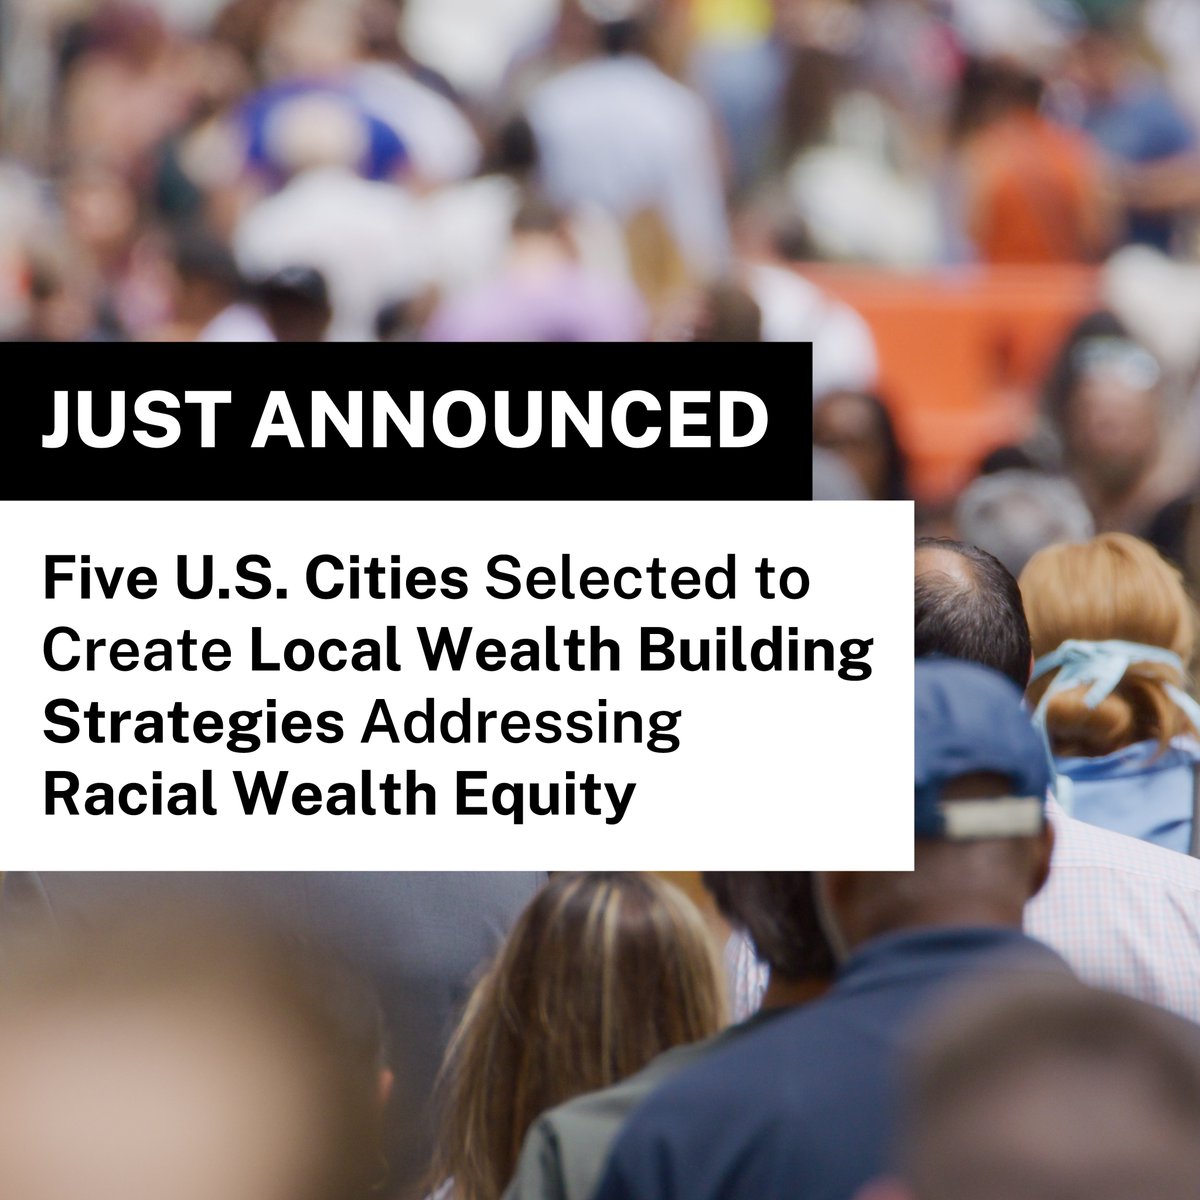 Cities and mayors are uniquely positioned to deliver large-scale, impactful local wealth building solutions. In partnership with our Greenwood Initiative, @CFEfund’s CityStart Initiative will support the new cohort of five cities in their efforts to develop and implement proven…